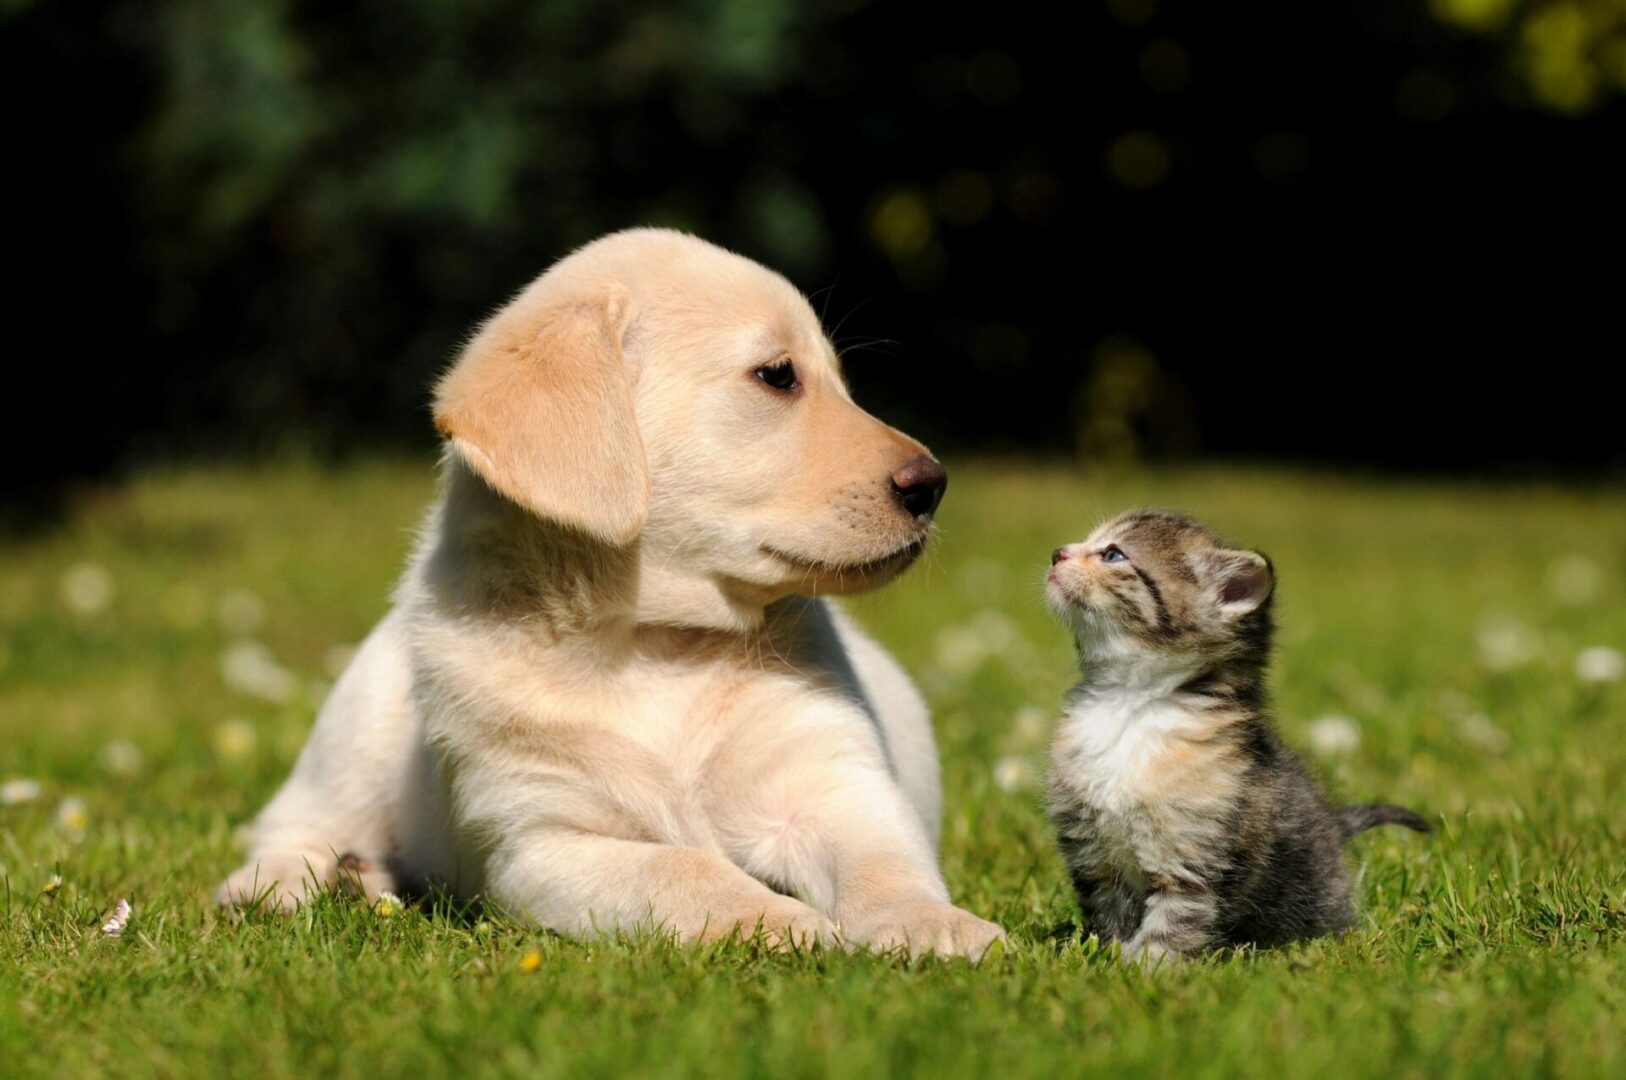 A cat and dog sitting in the grass.